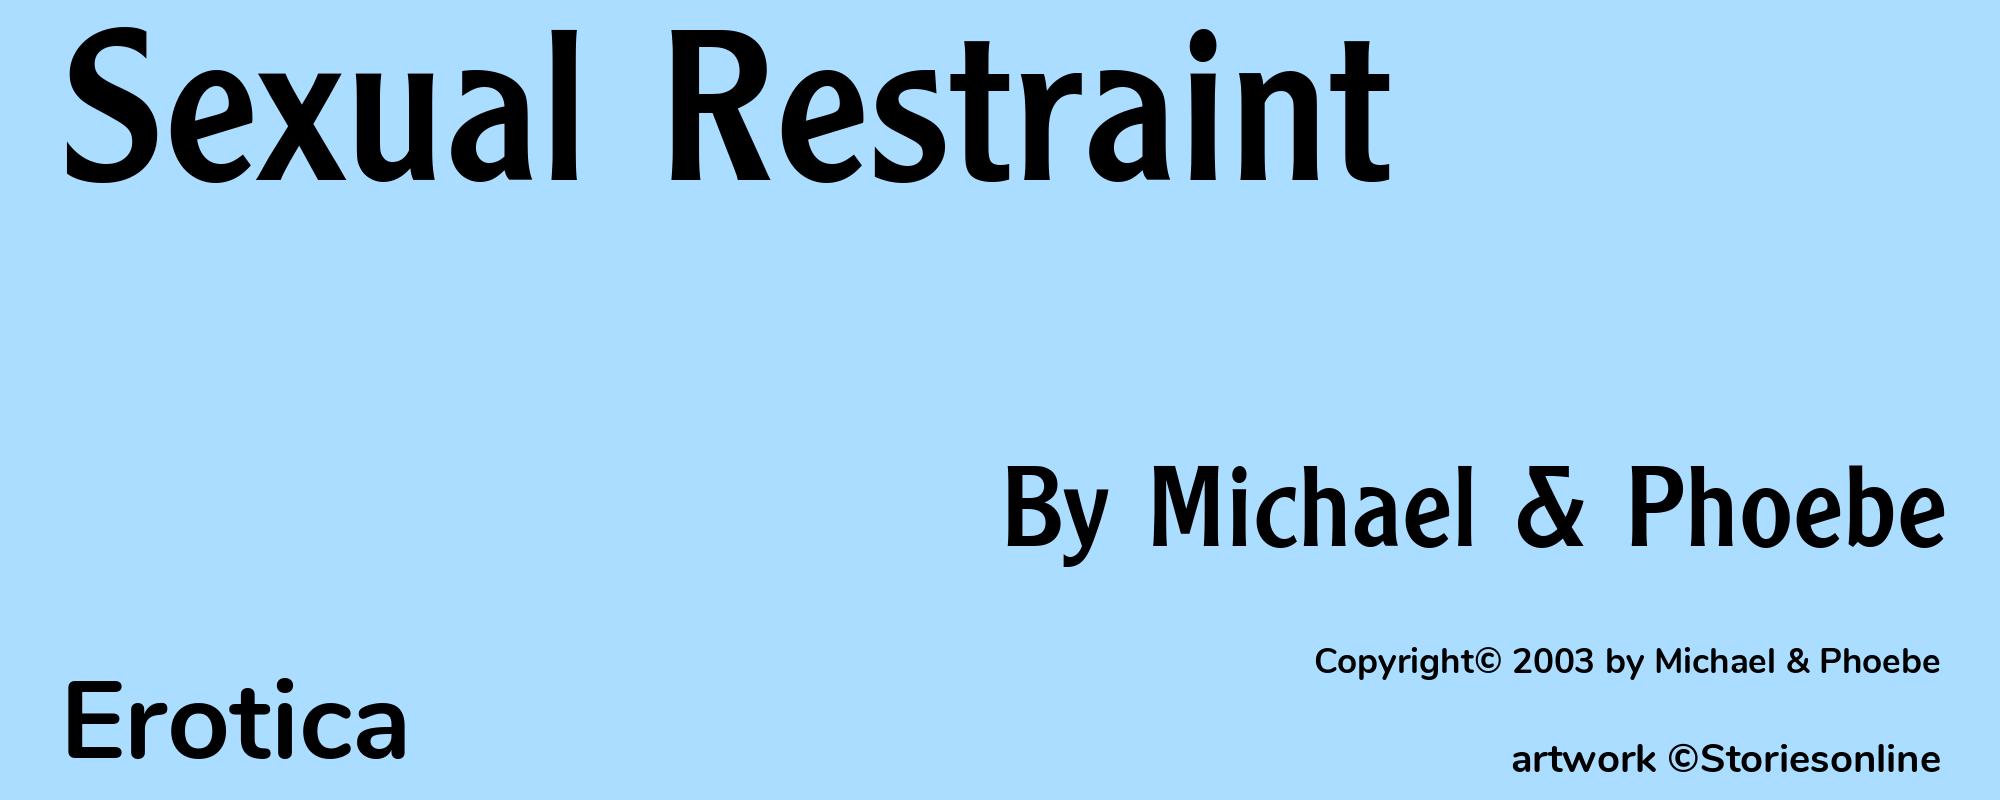 Sexual Restraint - Cover